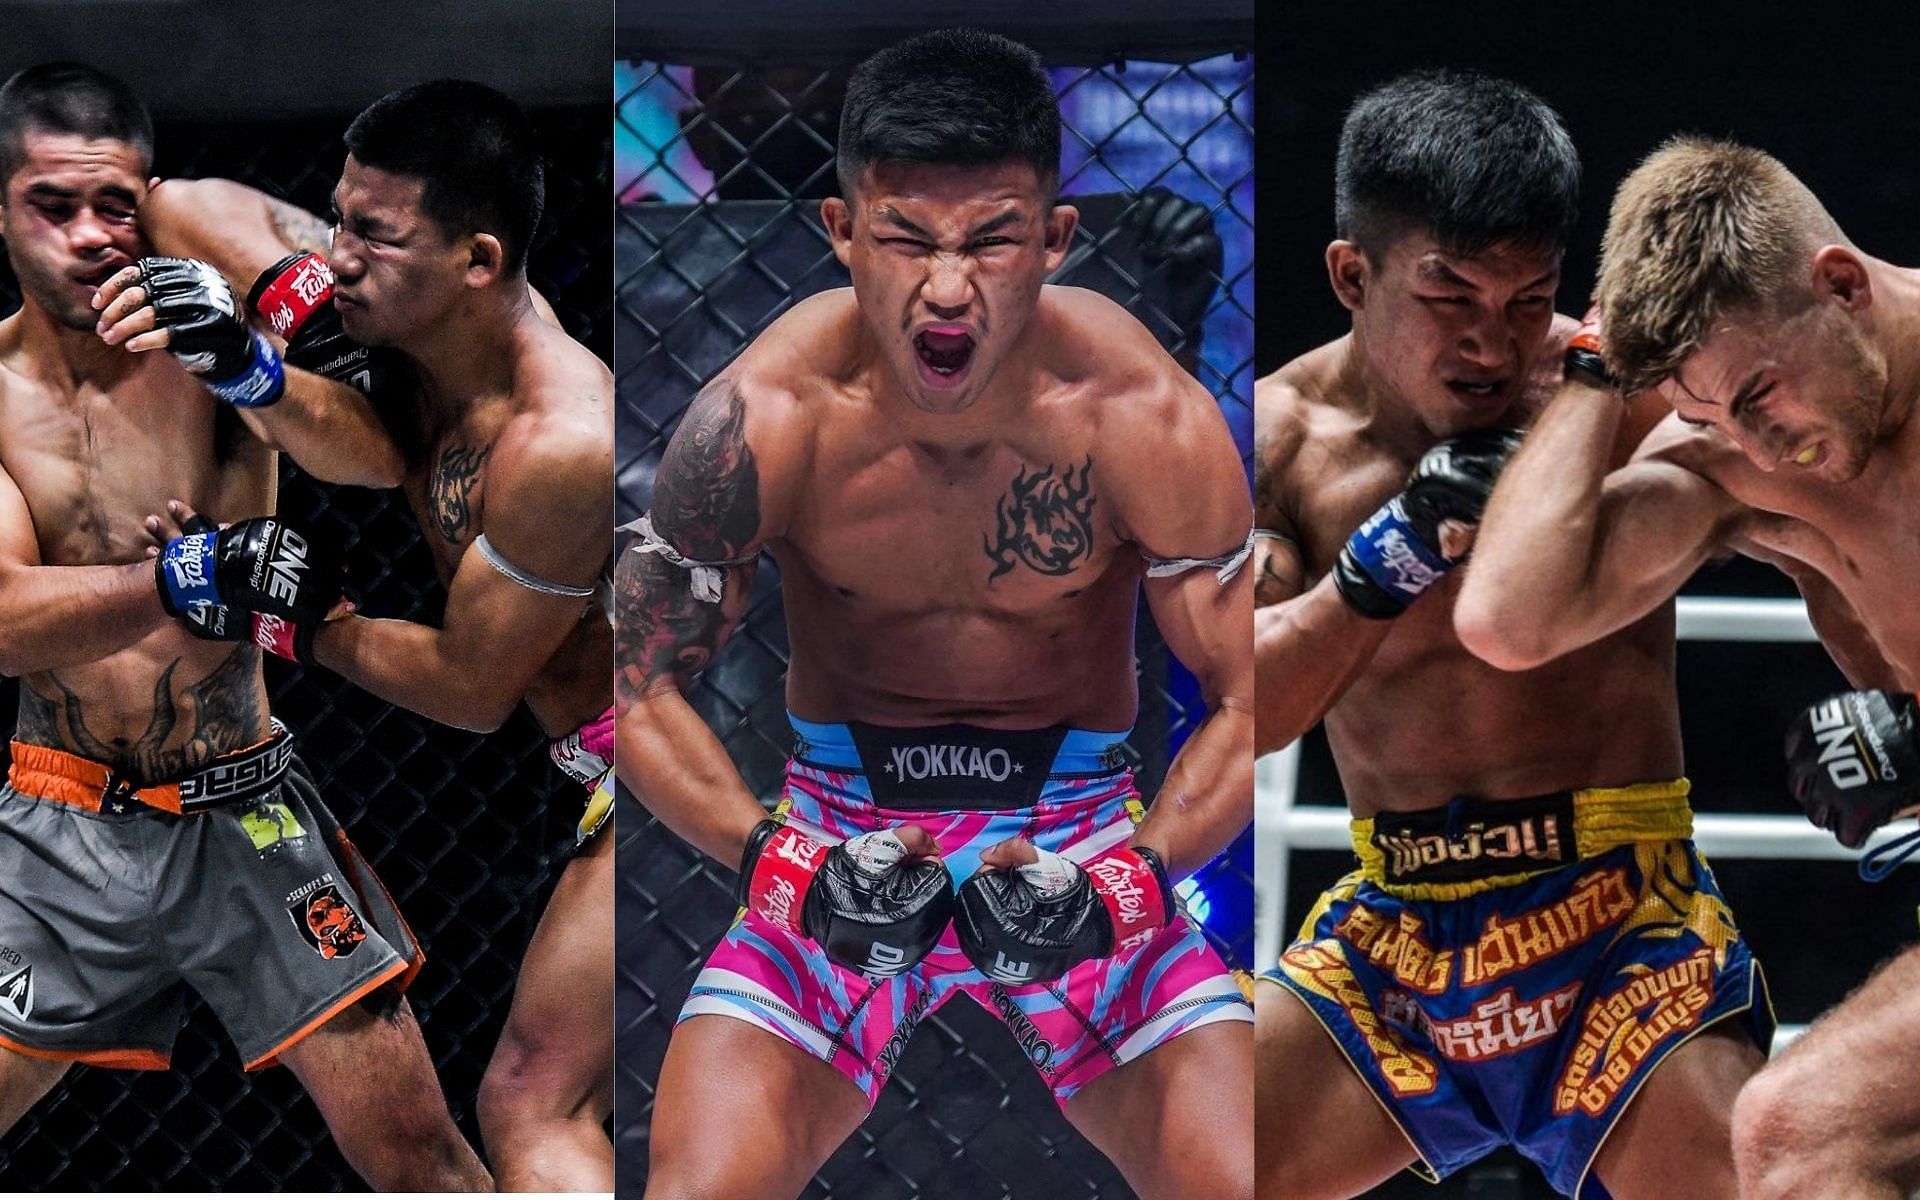 ONE flyweight Muay Thai champion Rodtang Jitmuangnon had quite the string of memorable matches in ONE Championship. (Images courtesy of ONE Championship)